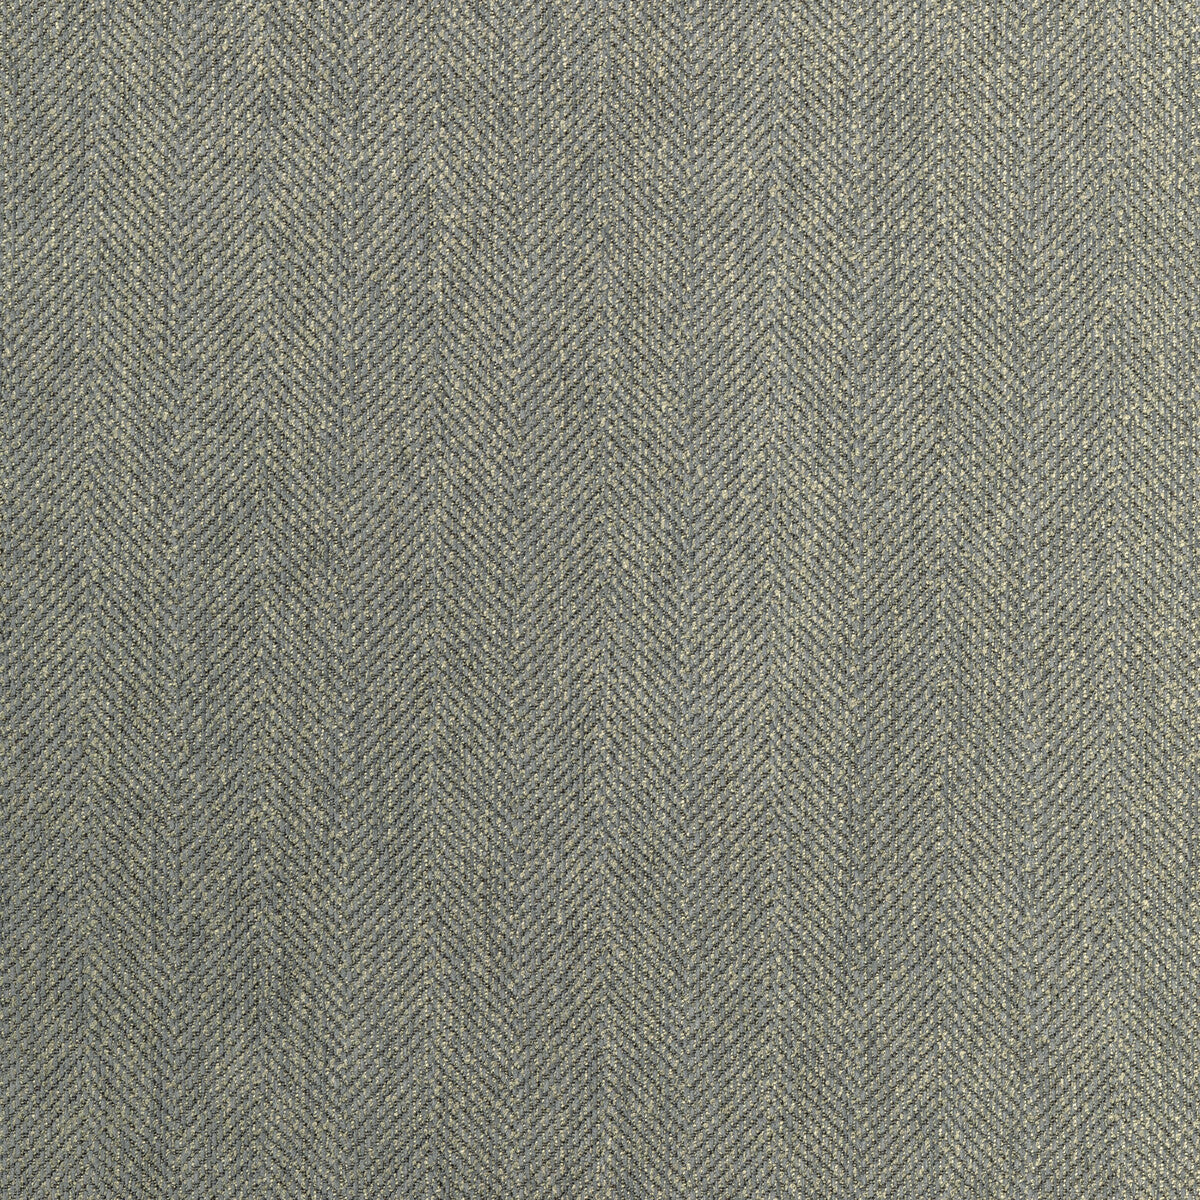 Healing Touch fabric in moon shadow color - pattern 36389.2111.0 - by Kravet Design in the Crypton Home - Celliant collection